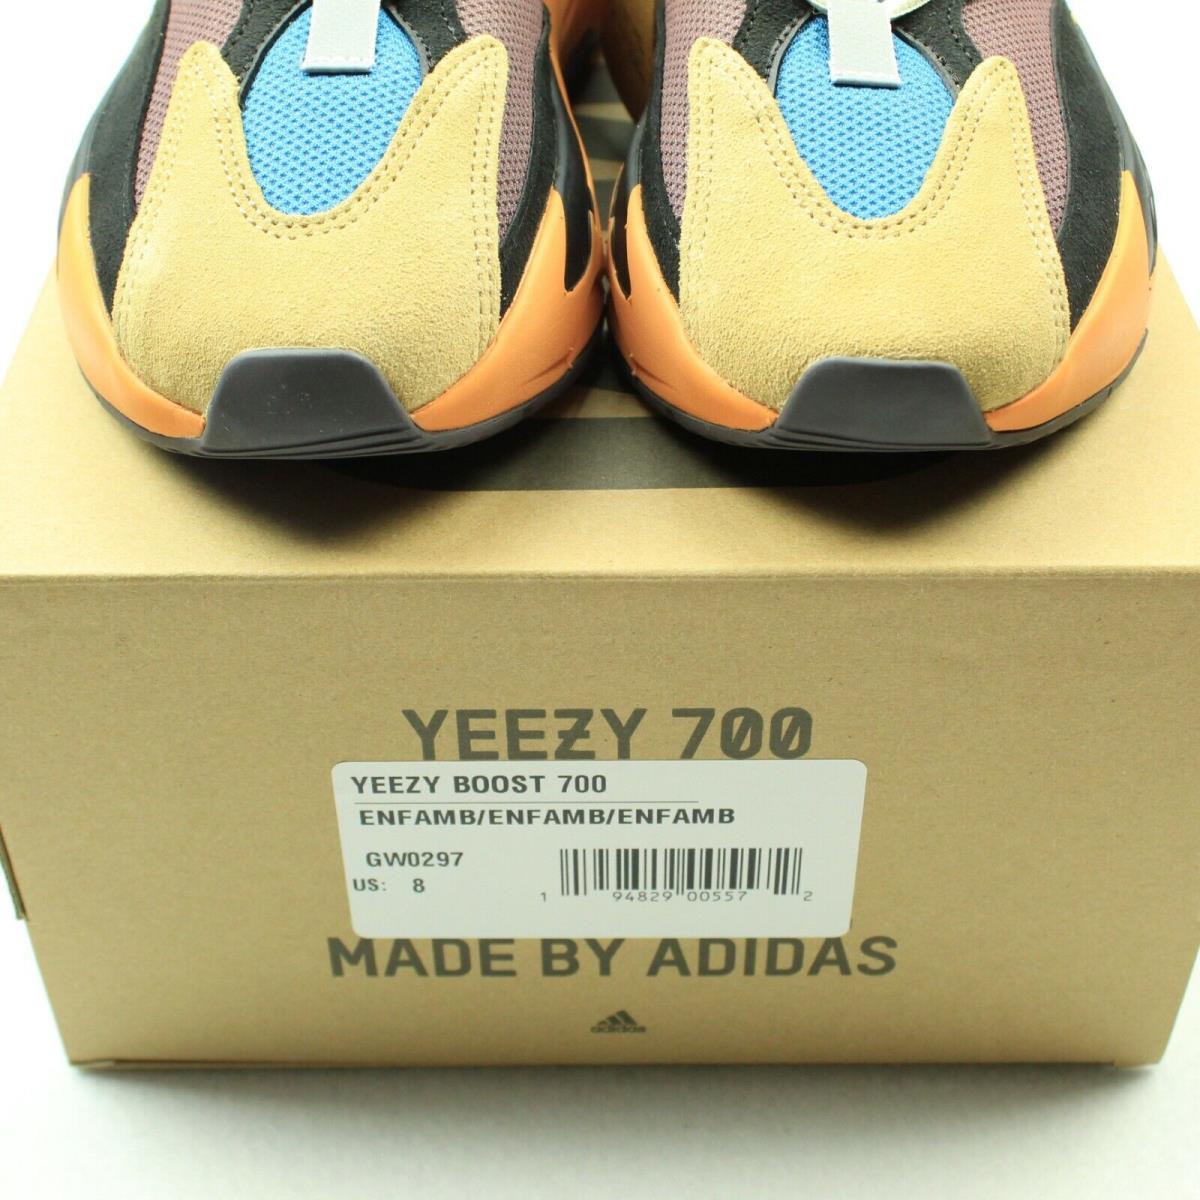 Yeezy 700 Boost Adidas Enflame Amber Ready to Ship GW0297 Shoes Size 8